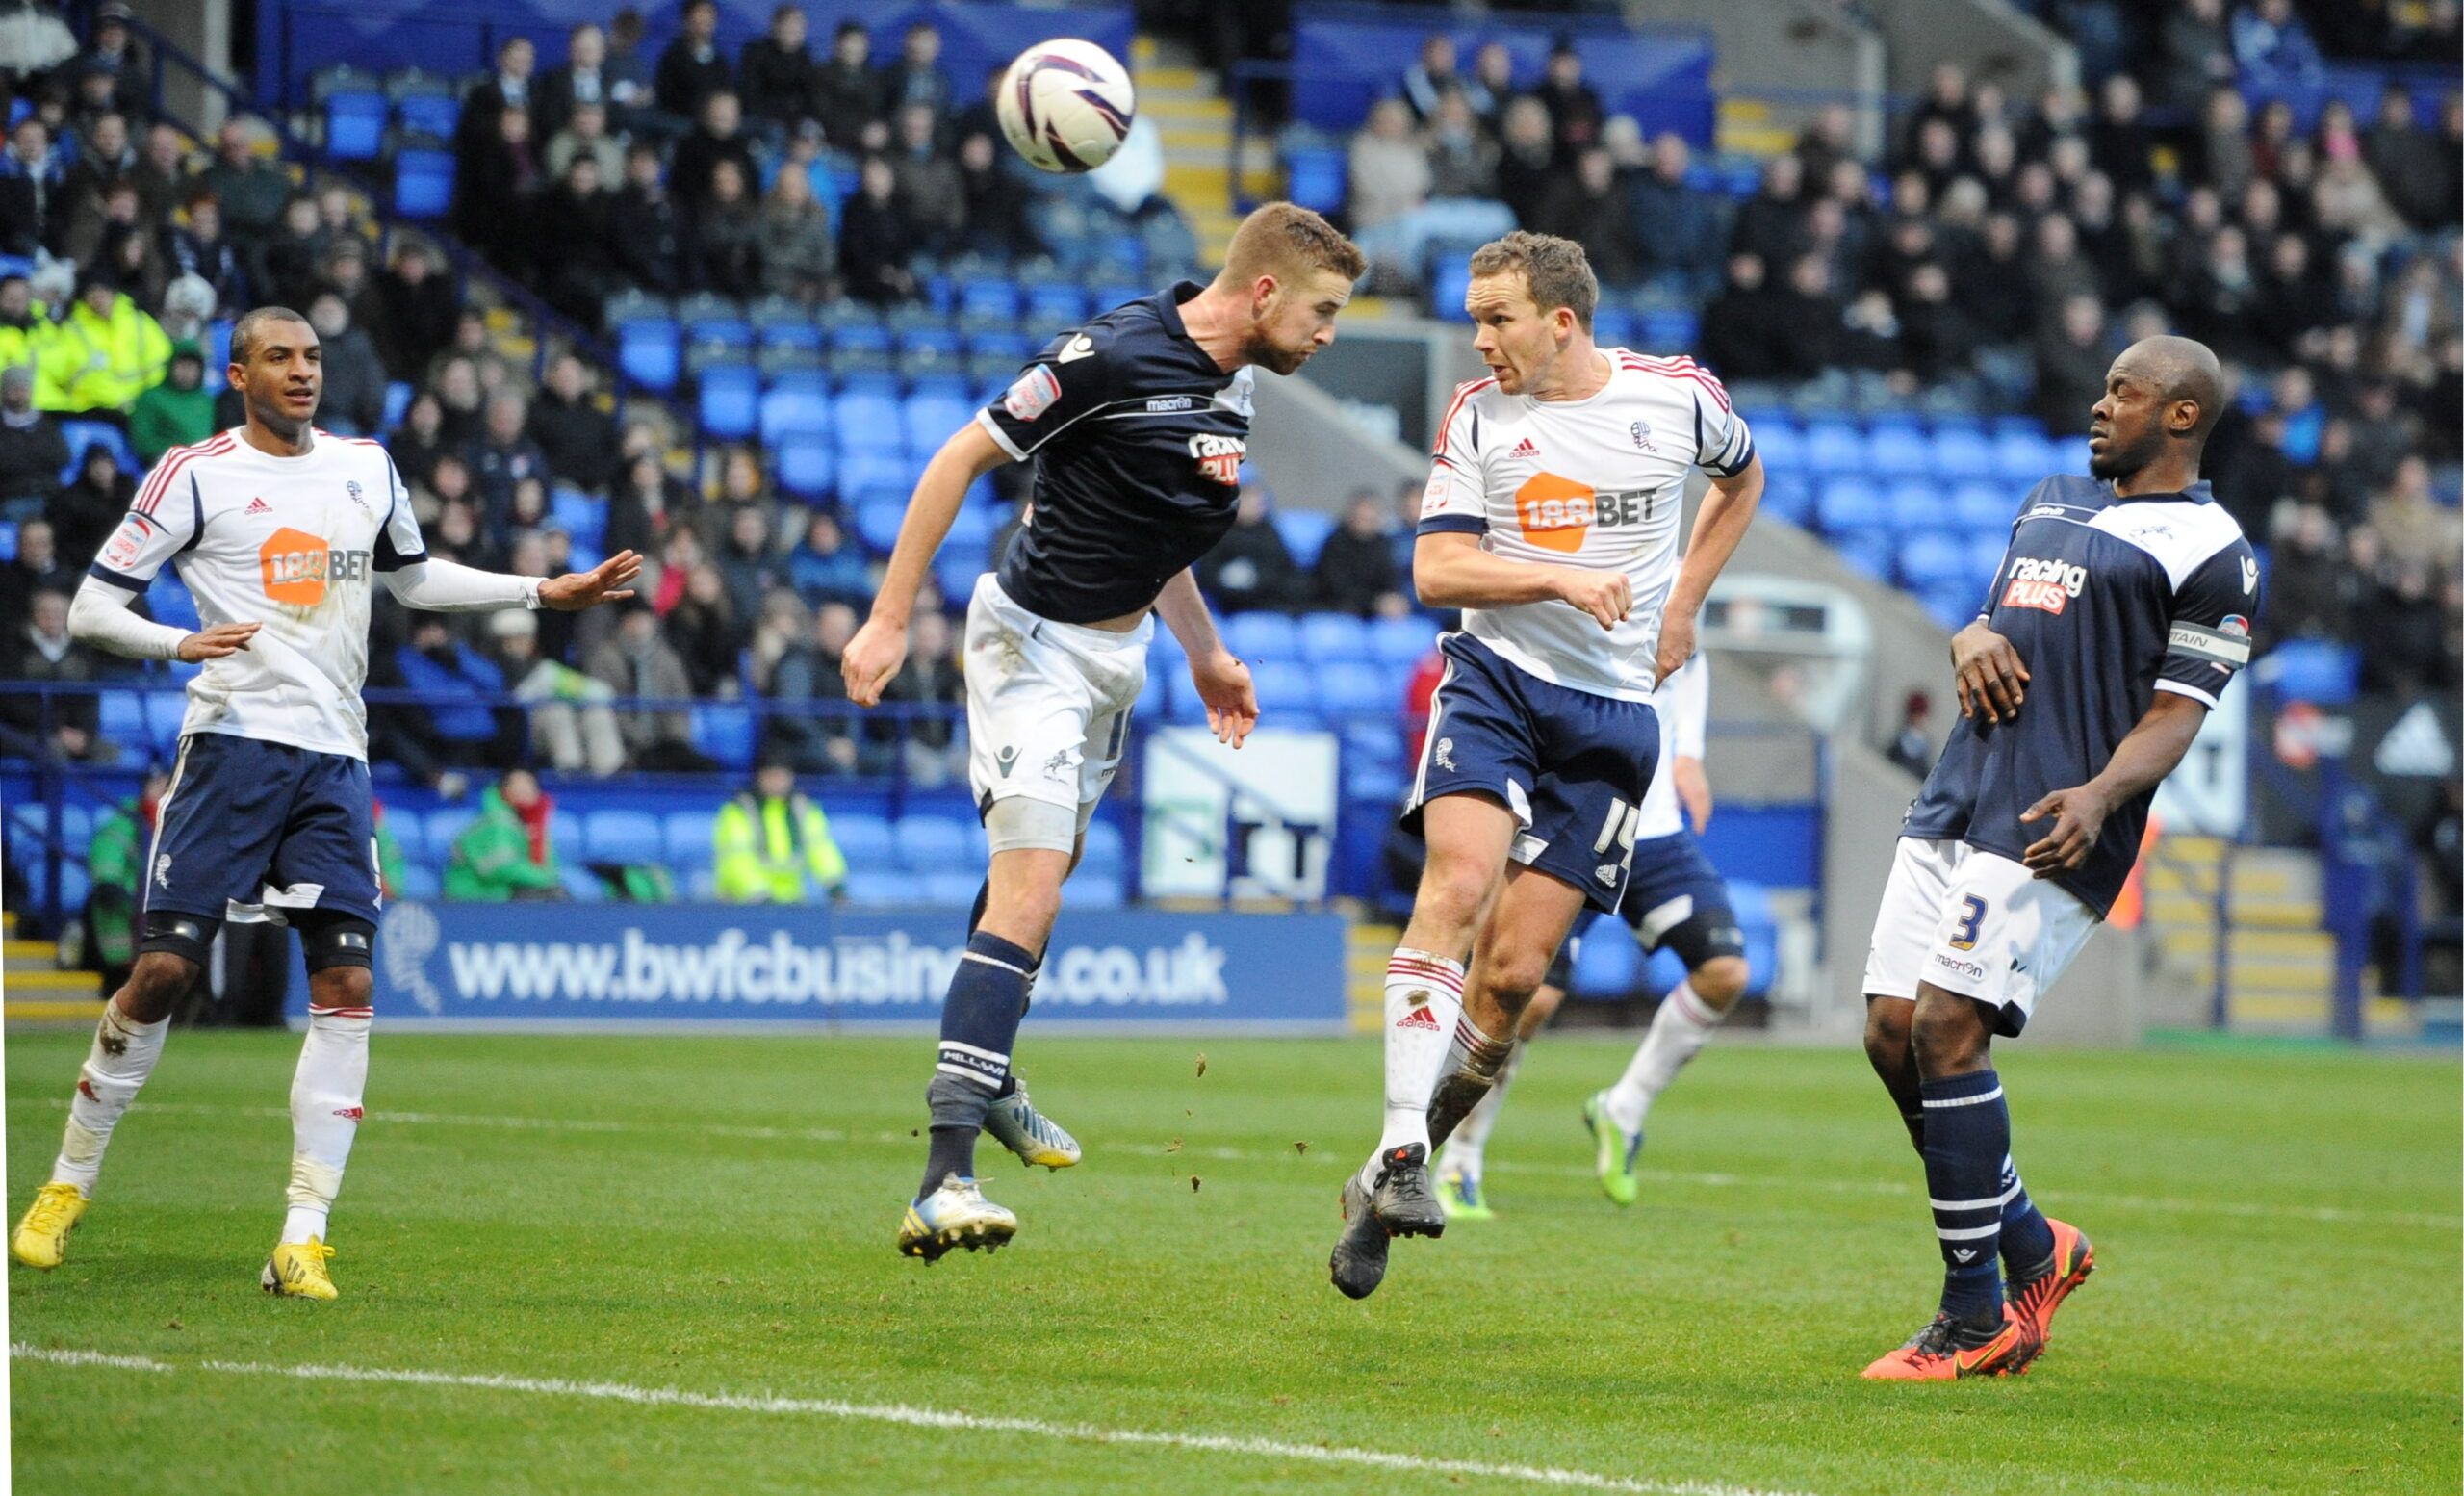 Football - Bolton Wanderers v Millwall - npower Football League Championship - The Reebok Stadium - 12/13 - 12/1/13 
Bolton's Kevin Davies in action against Milwall's Mark Beevers 
Mandatory Credit: Action Images / Paul Currie 
EDITORIAL USE ONLY. No use with unauthorized audio, video, data, fixture lists, club/league logos or live services. Online in-match use limited to 45 images, no video emulation. No use in betting, games or single club/league/player publications.  Please contact your accou